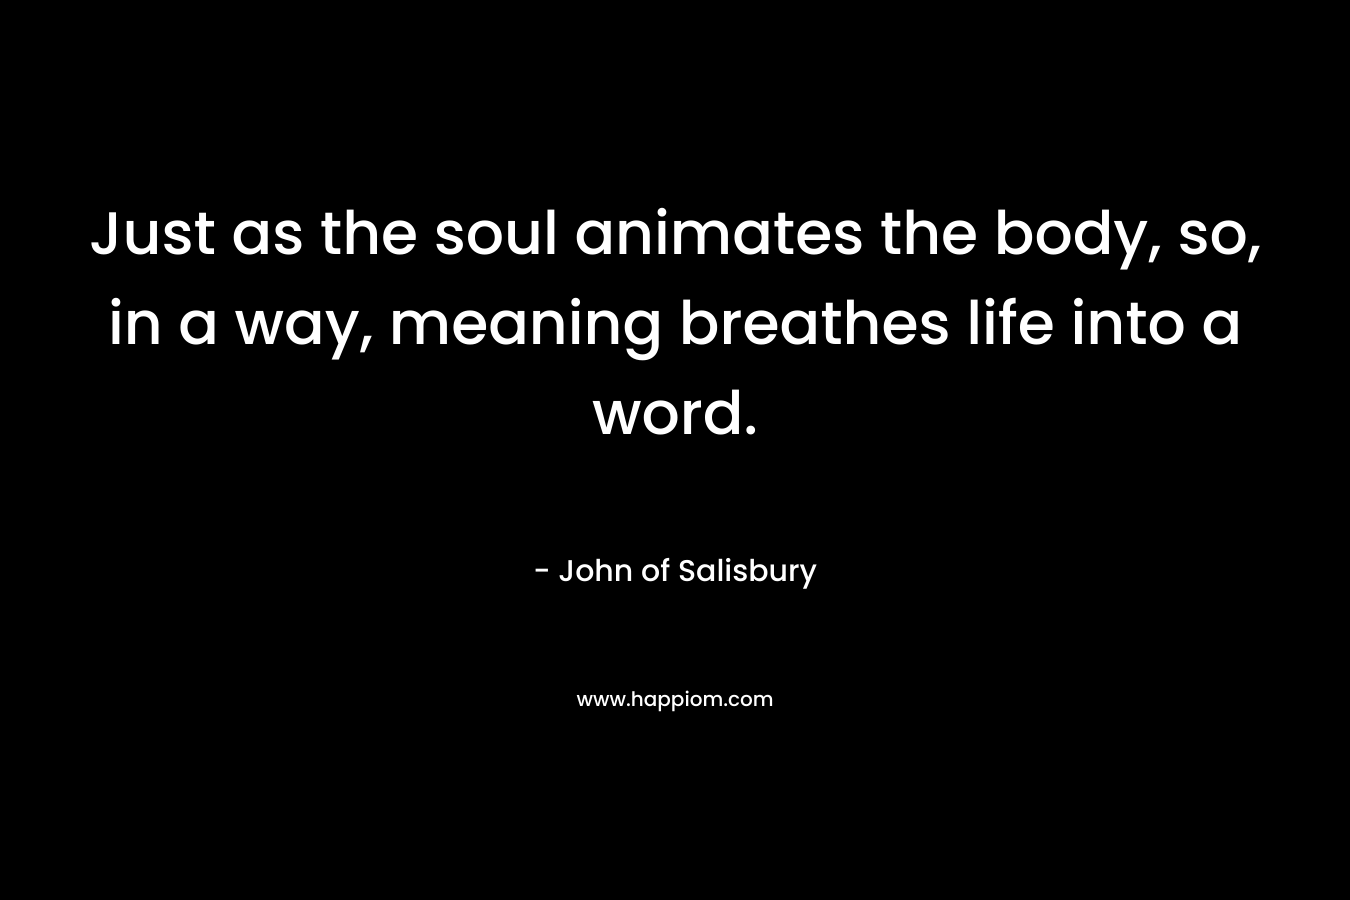 Just as the soul animates the body, so, in a way, meaning breathes life into a word. – John of Salisbury